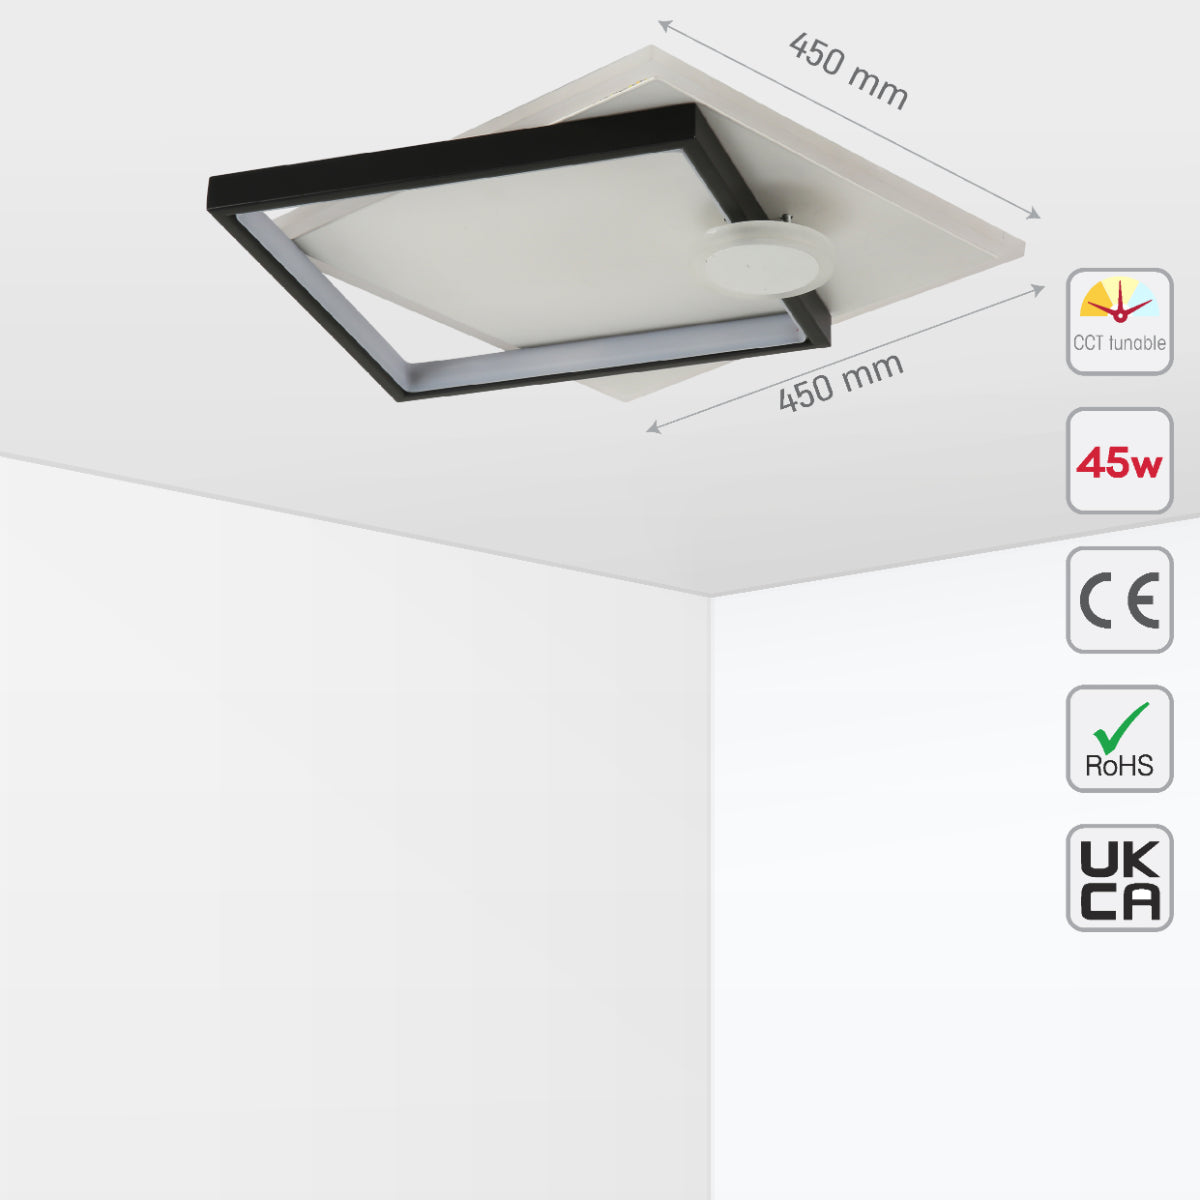 Size and certifications of Geometric Tri-Element LED Flush Ceiling Light 159-18111